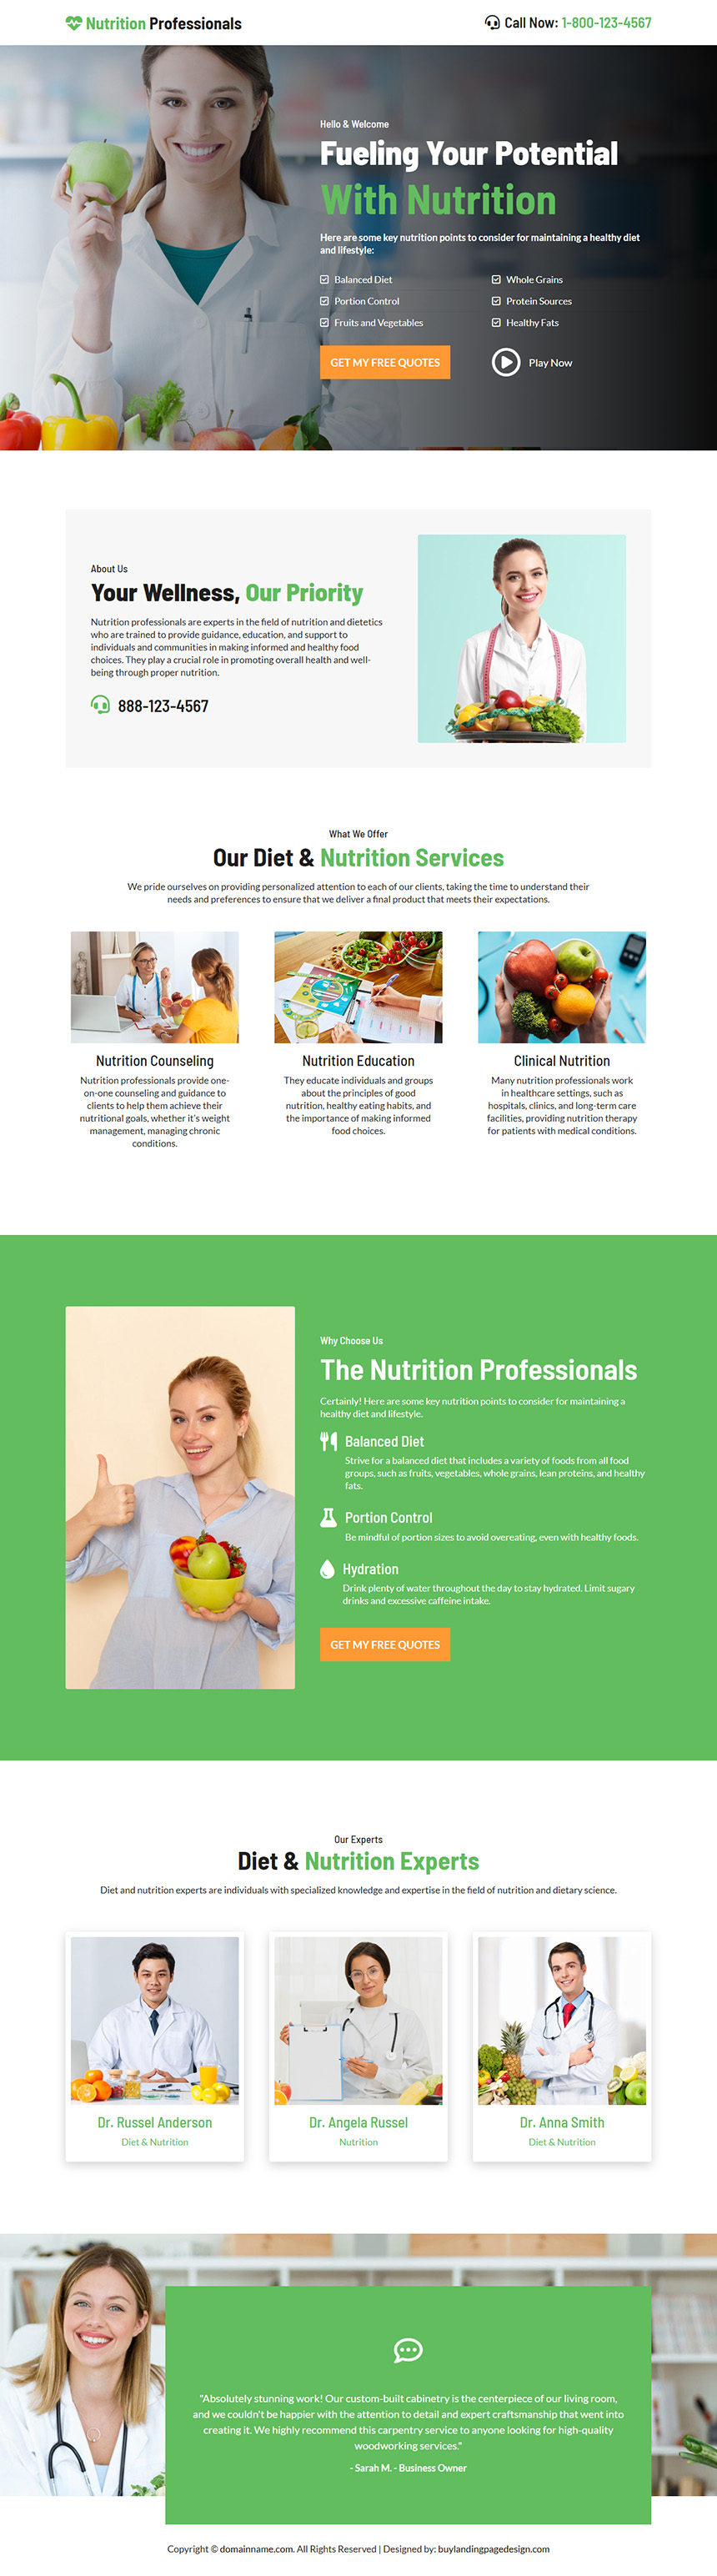 diet and nutrition professional lead capture landing page